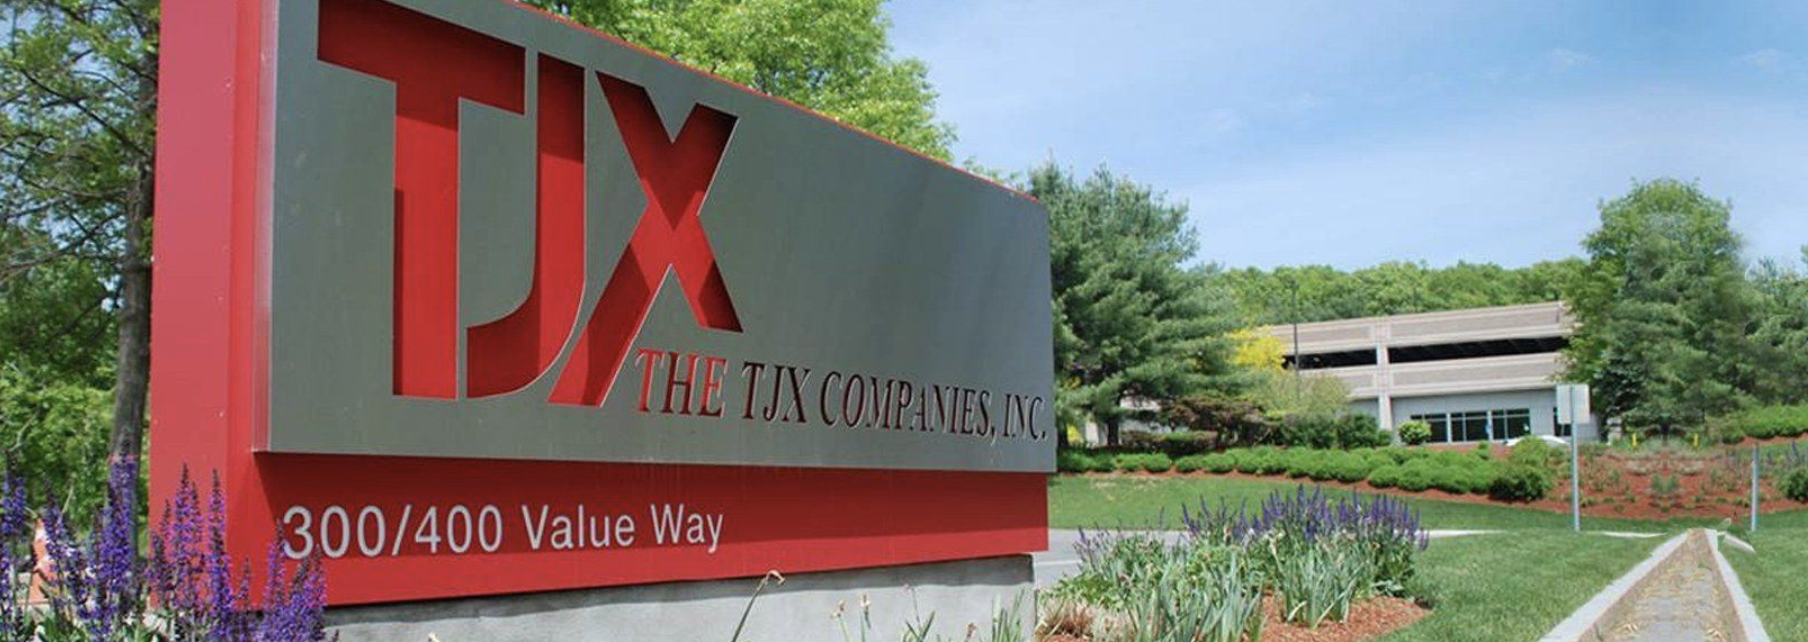 Worst companies to work for TJX Companies logo